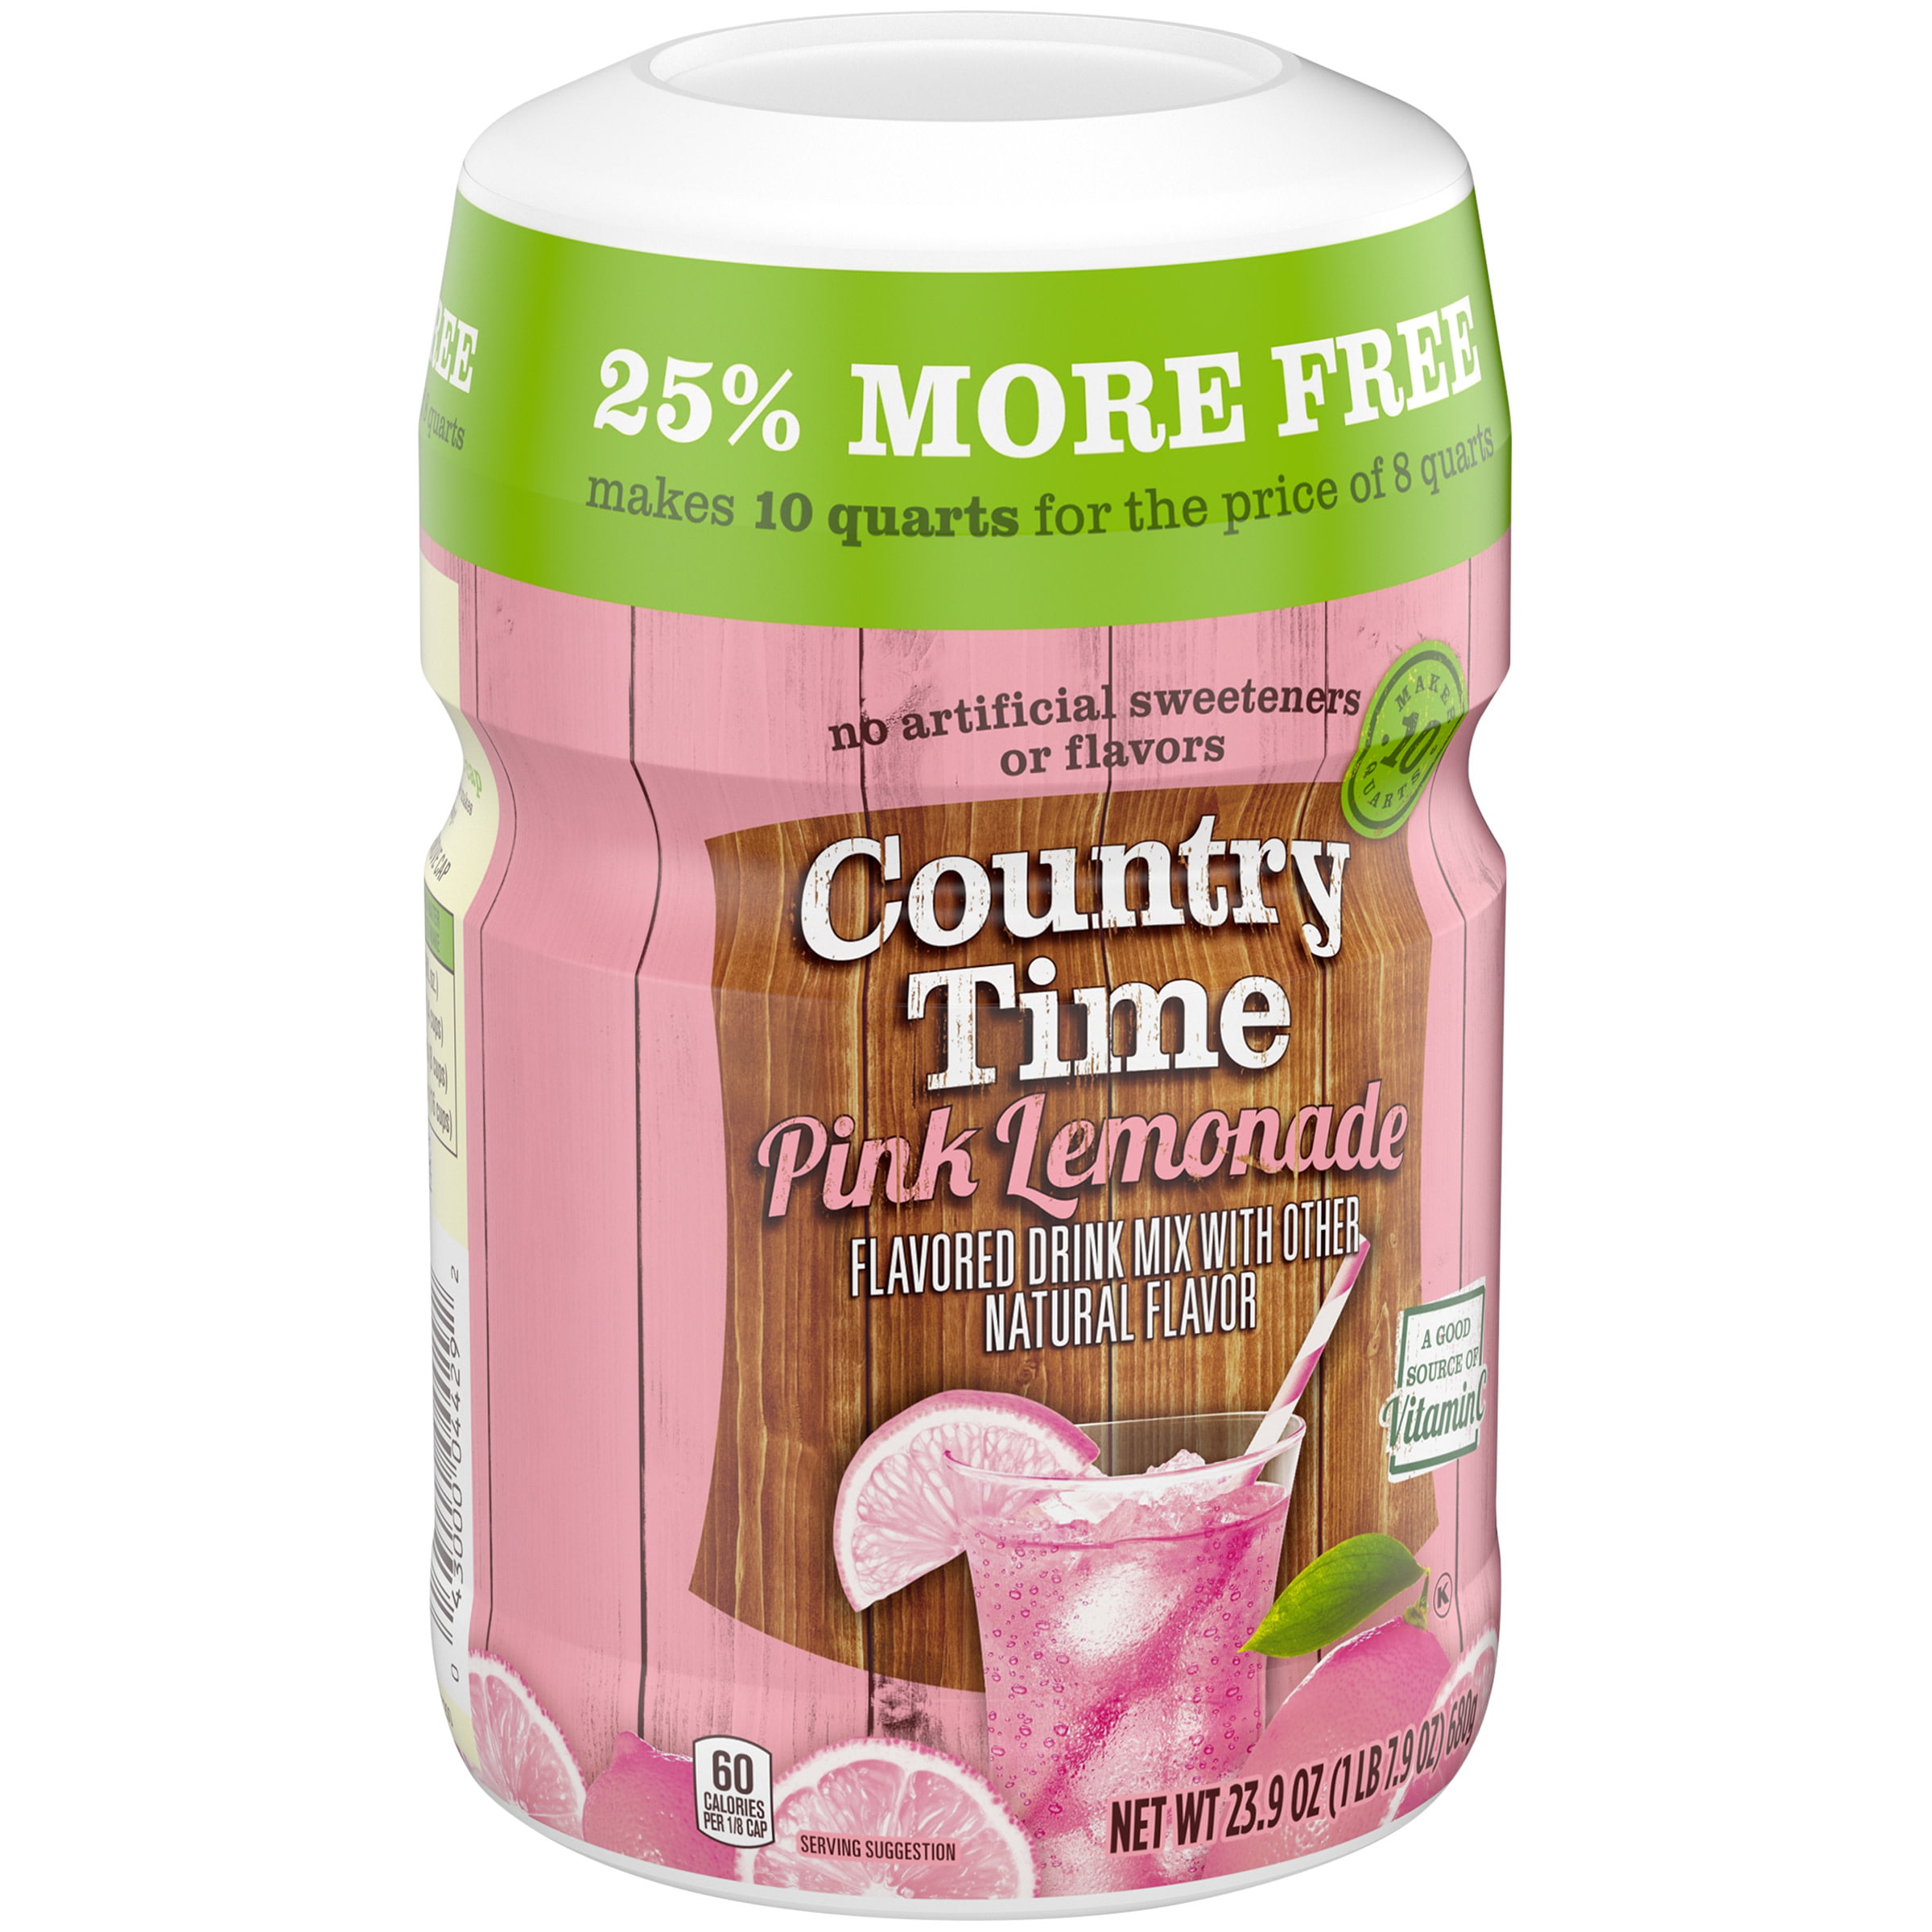 Country Time Pink Lemonade Drink Mix, Caffeine Free, 23.9 oz Resealable ...